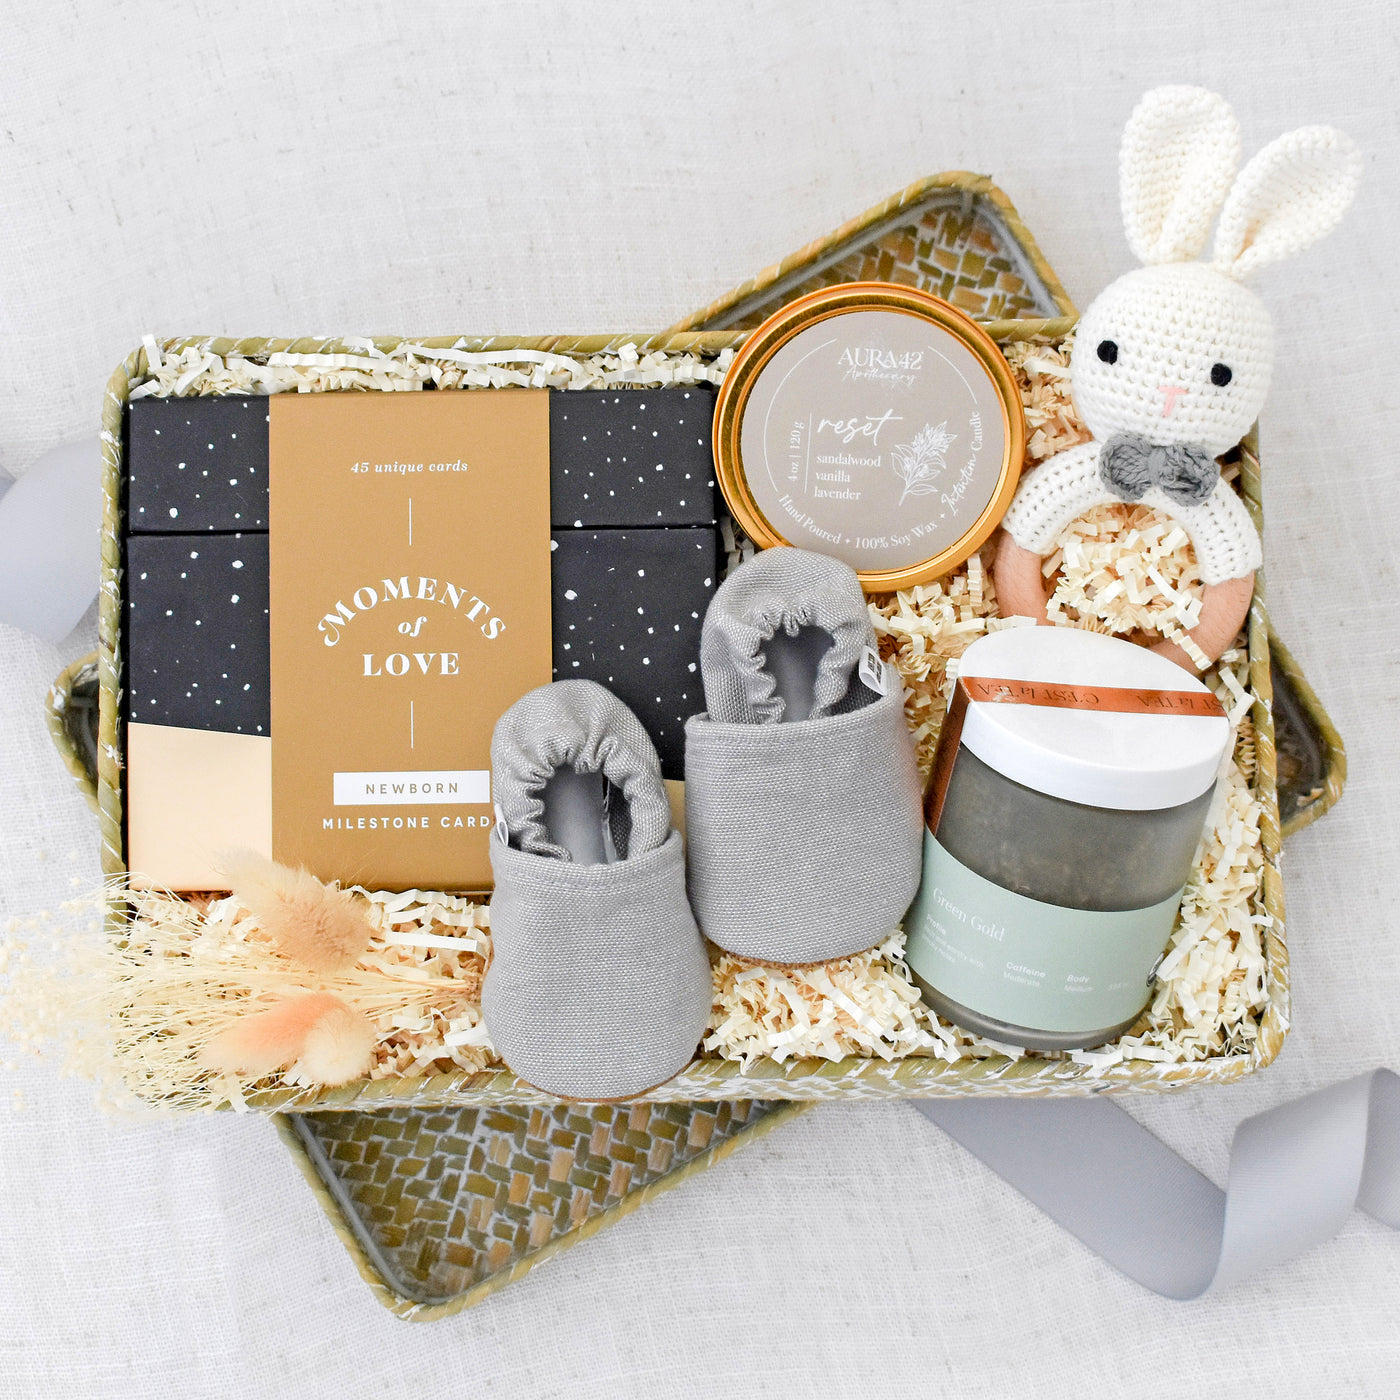 Baby and me gift box includes: Moments of Love: Newborn Milestone Cards by Compendium, Intention Candle Tin, Crochet Bunny Rattle, Light Grey Textured Moccasins, Green Gold Tea Jar